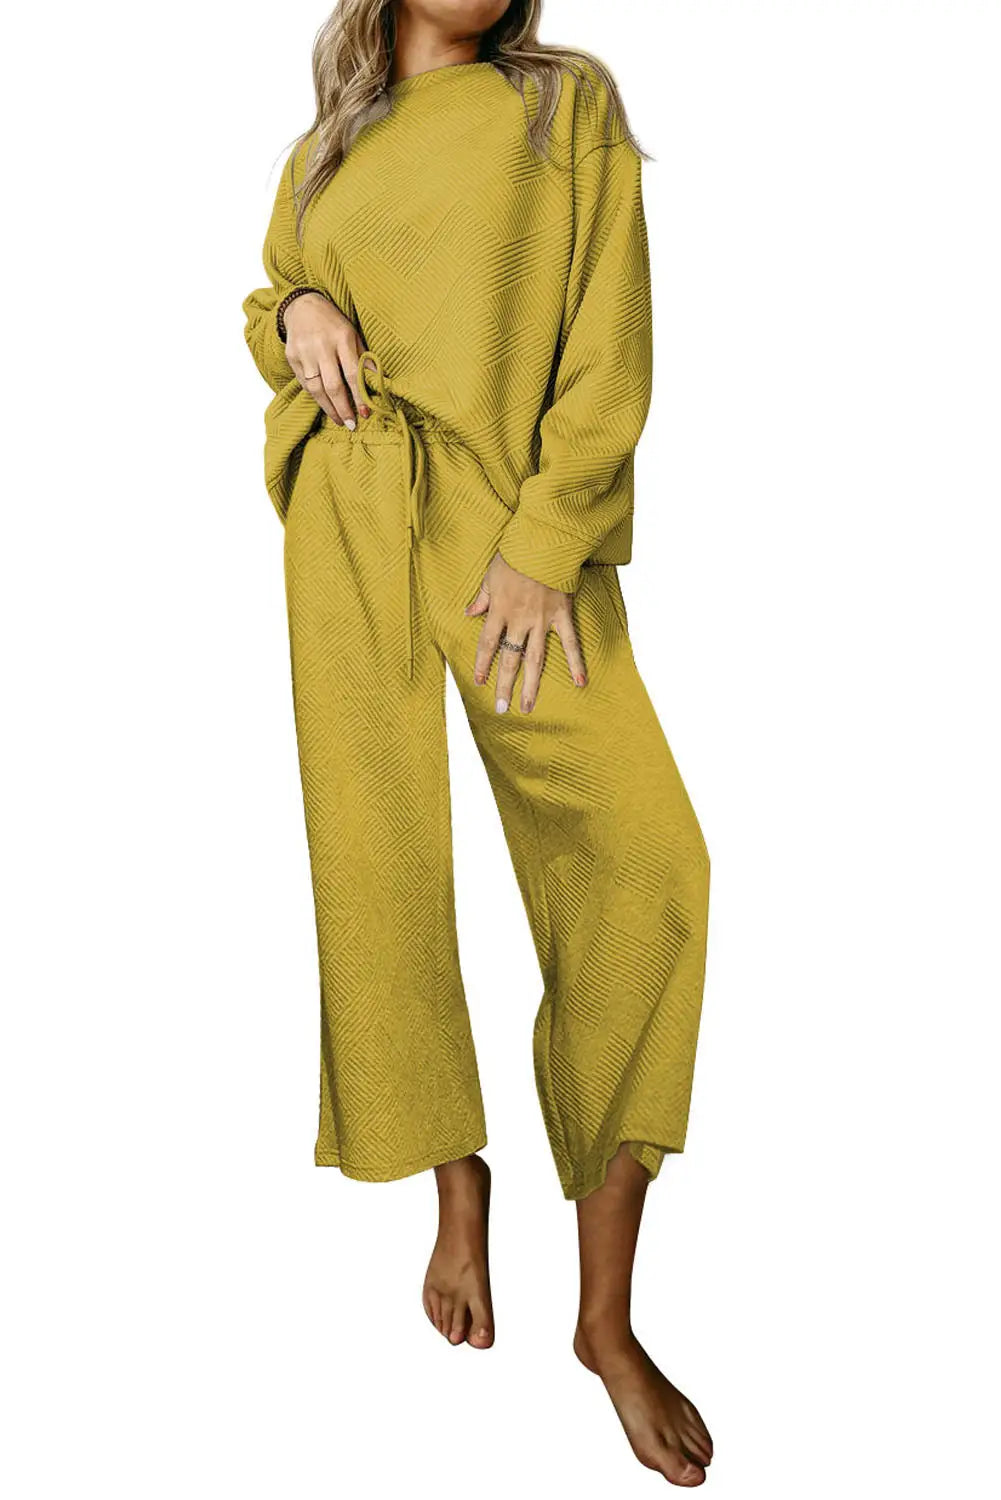 Ultra loose textured 2pcs slouchy outfit - pants sets